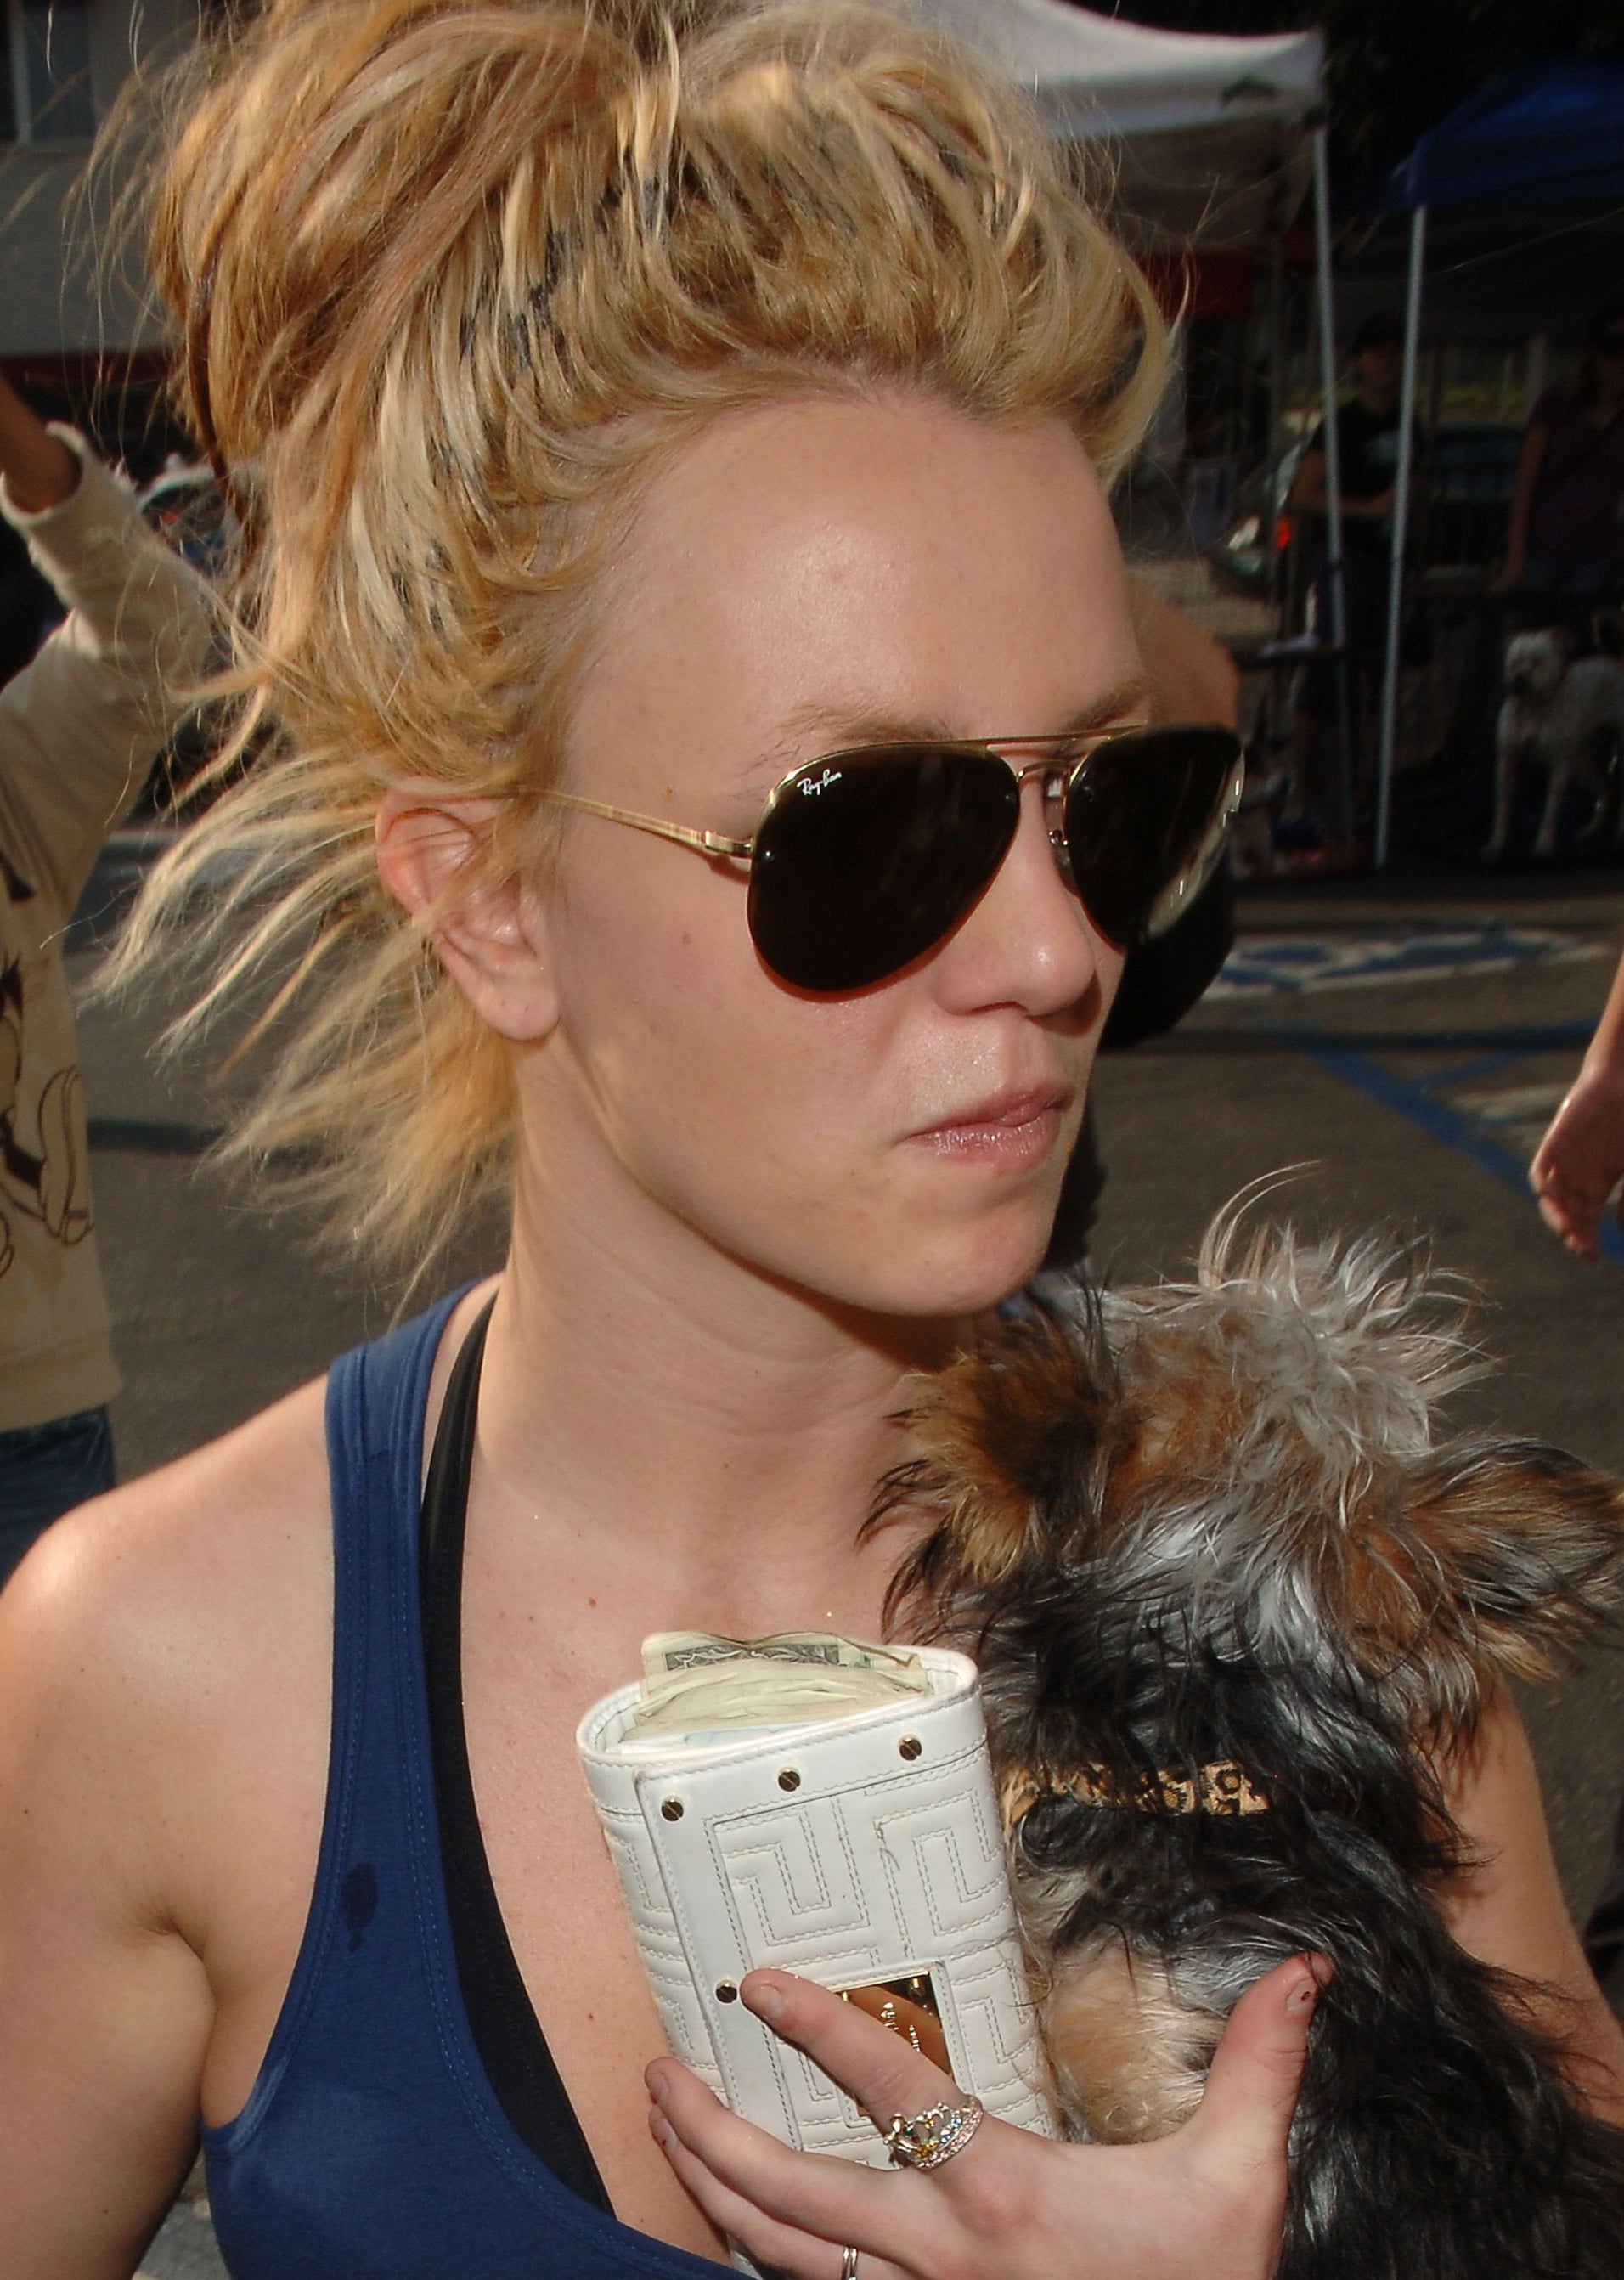 Close-up of Britney wearing sunglasses, a halter top, and her hair up